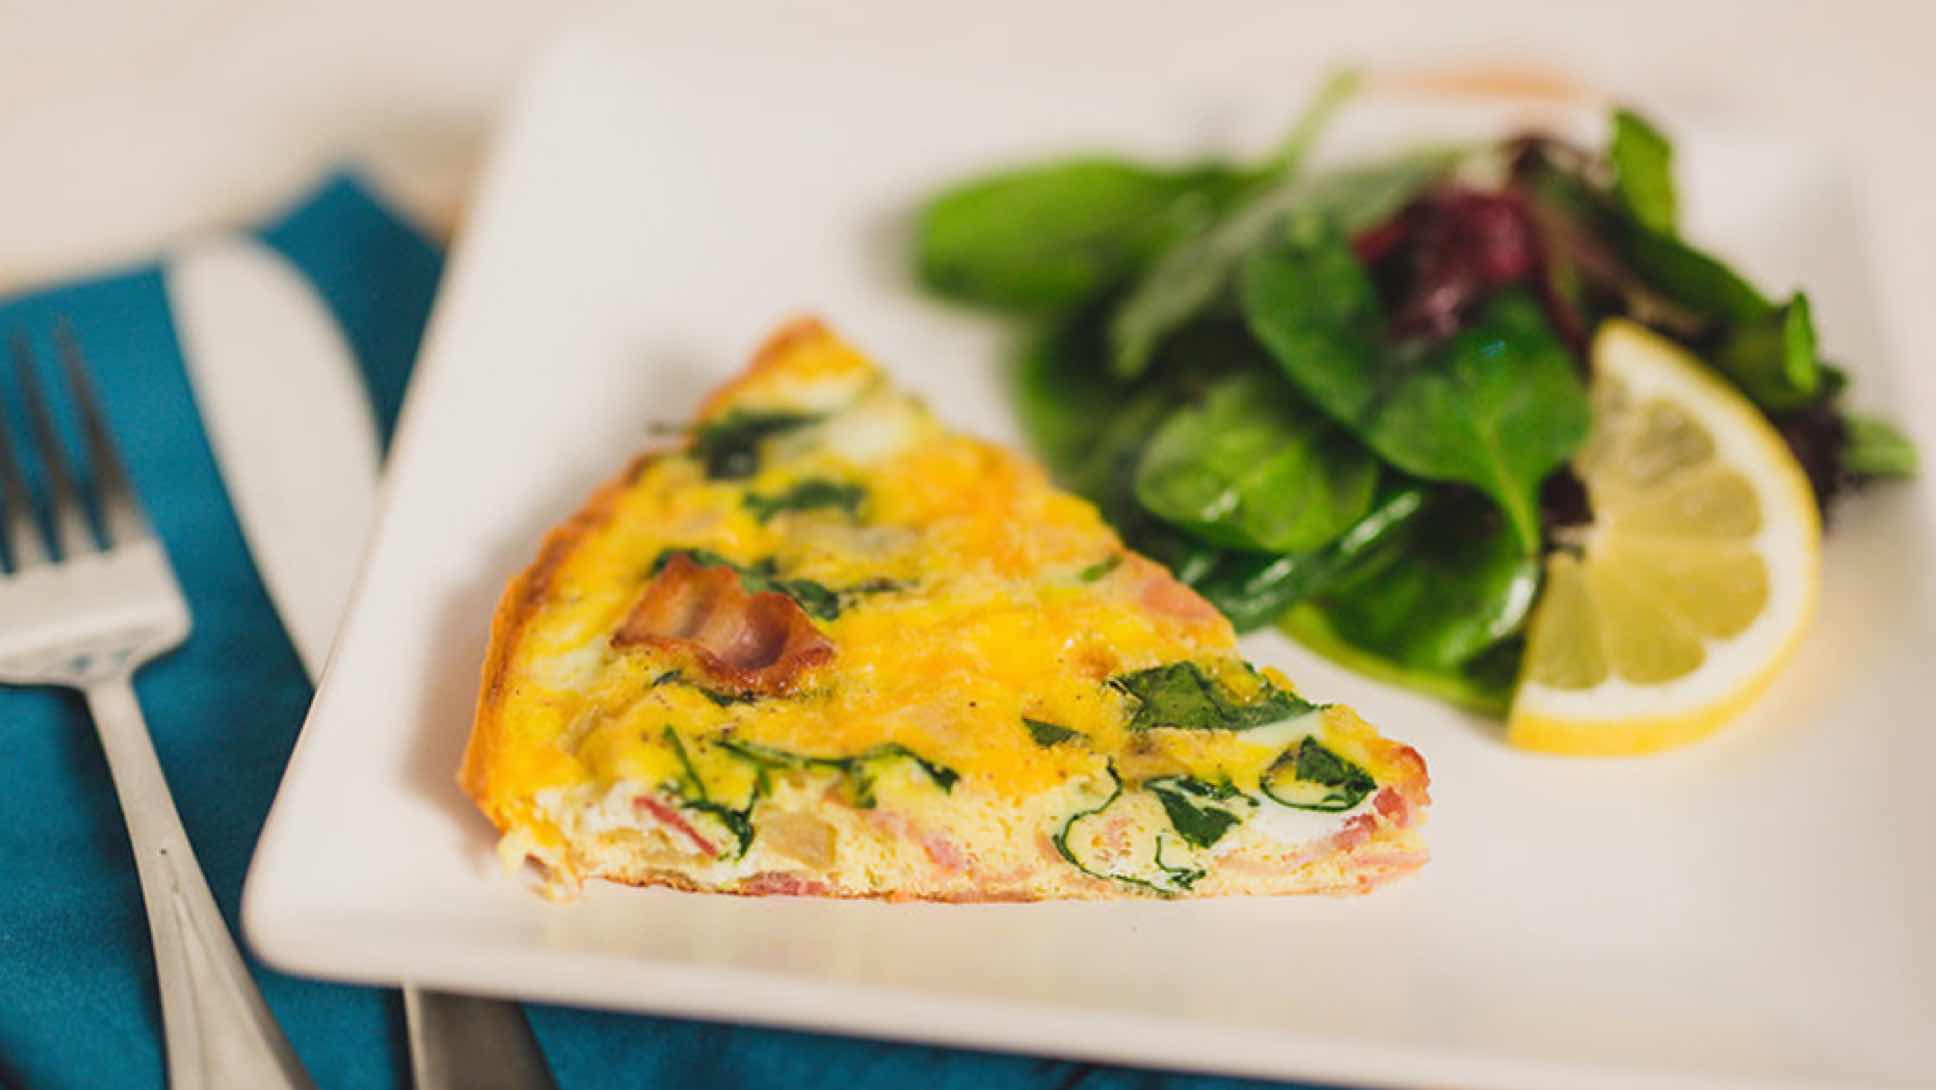 Egg frittata on a plate with mixed greens.